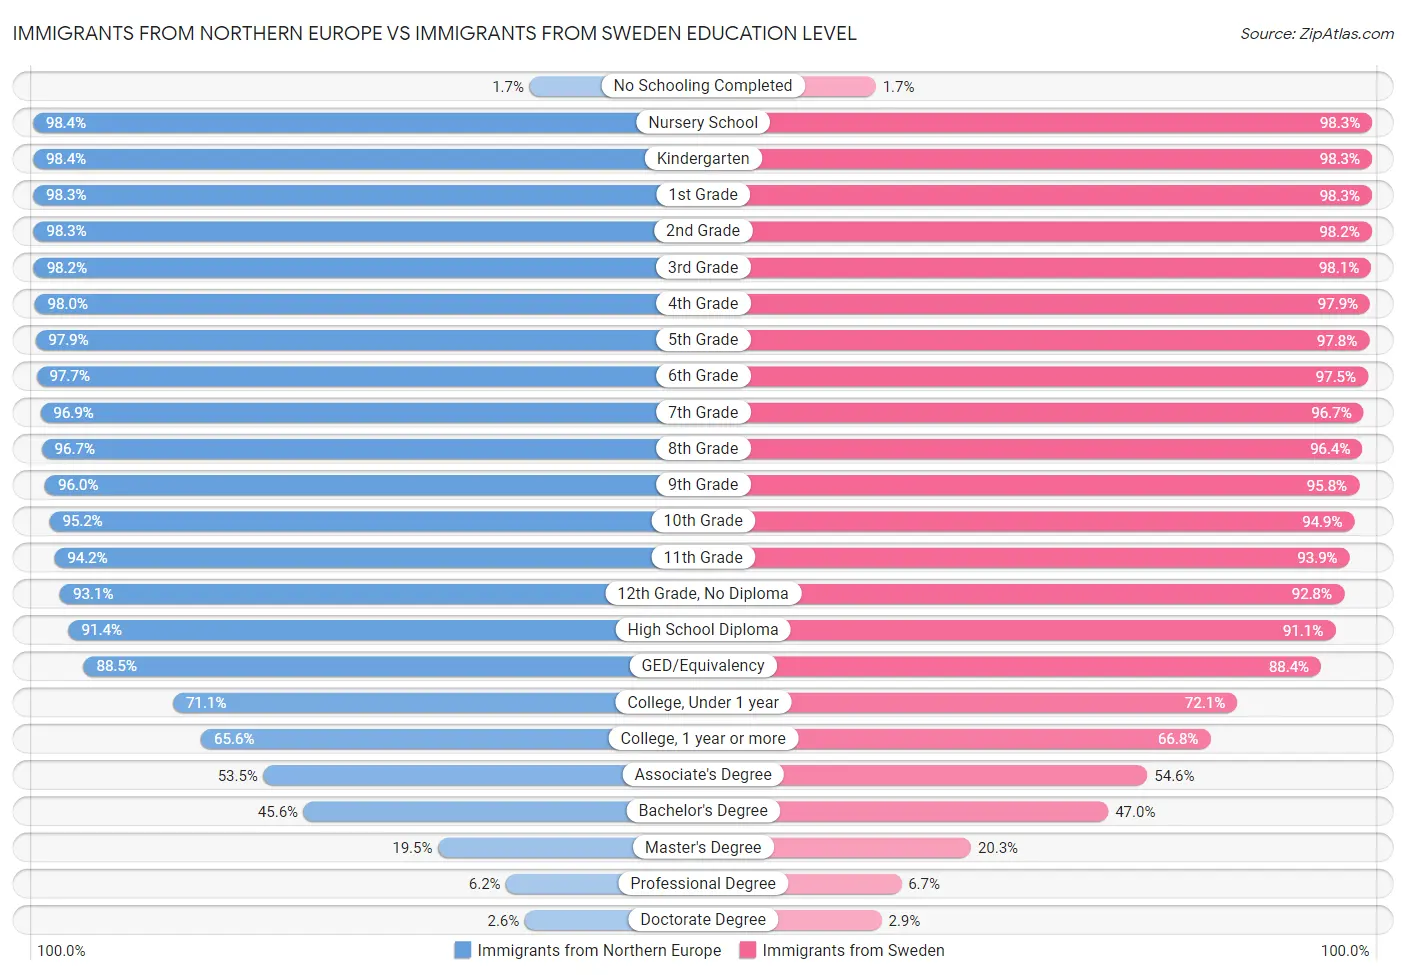 Immigrants from Northern Europe vs Immigrants from Sweden Education Level